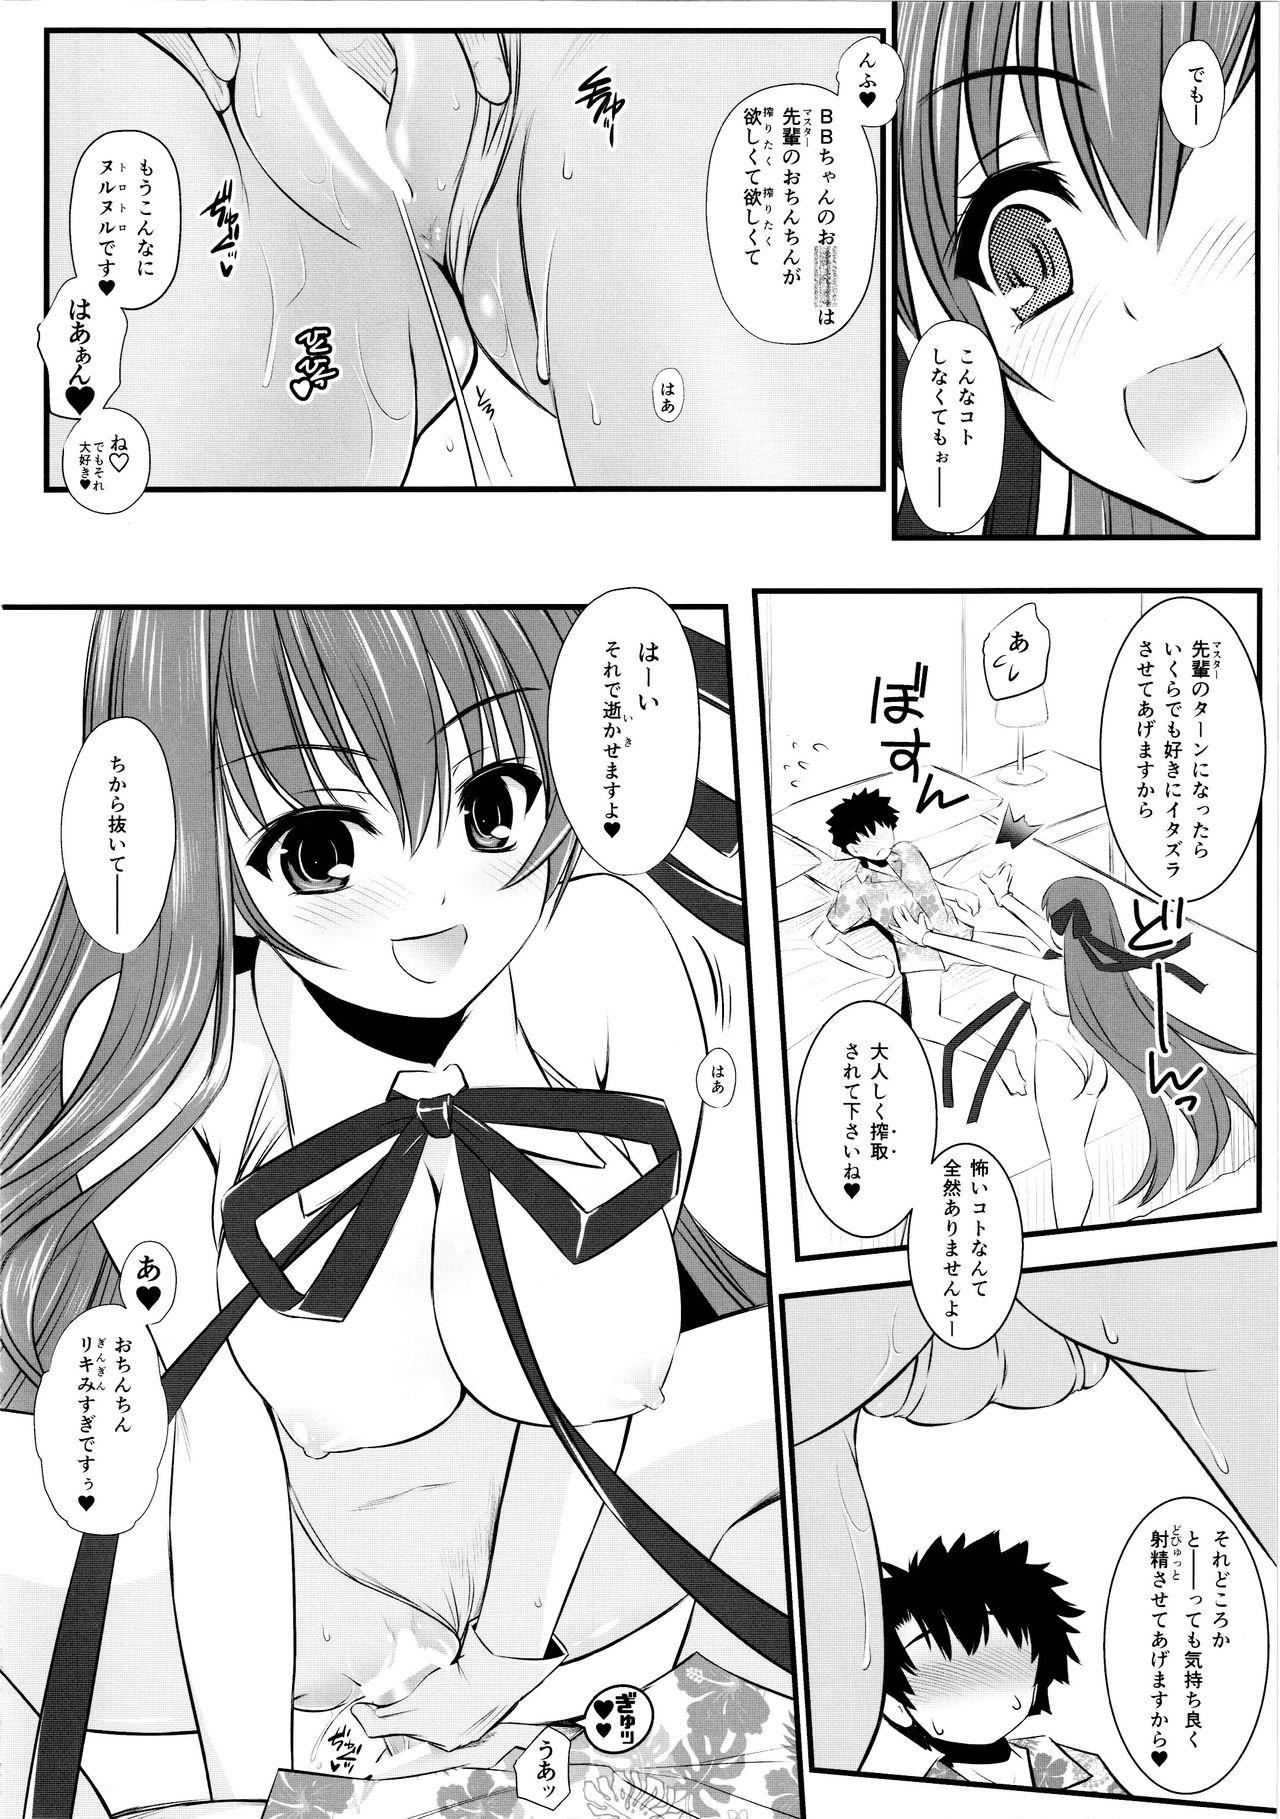 Dildo Fucking (C96) [Yakan Honpo (Inoue Tommy)] Queen [Kyuuin] BB-chan (Fate/Grand Order) - Fate grand order Dirty Talk - Page 8